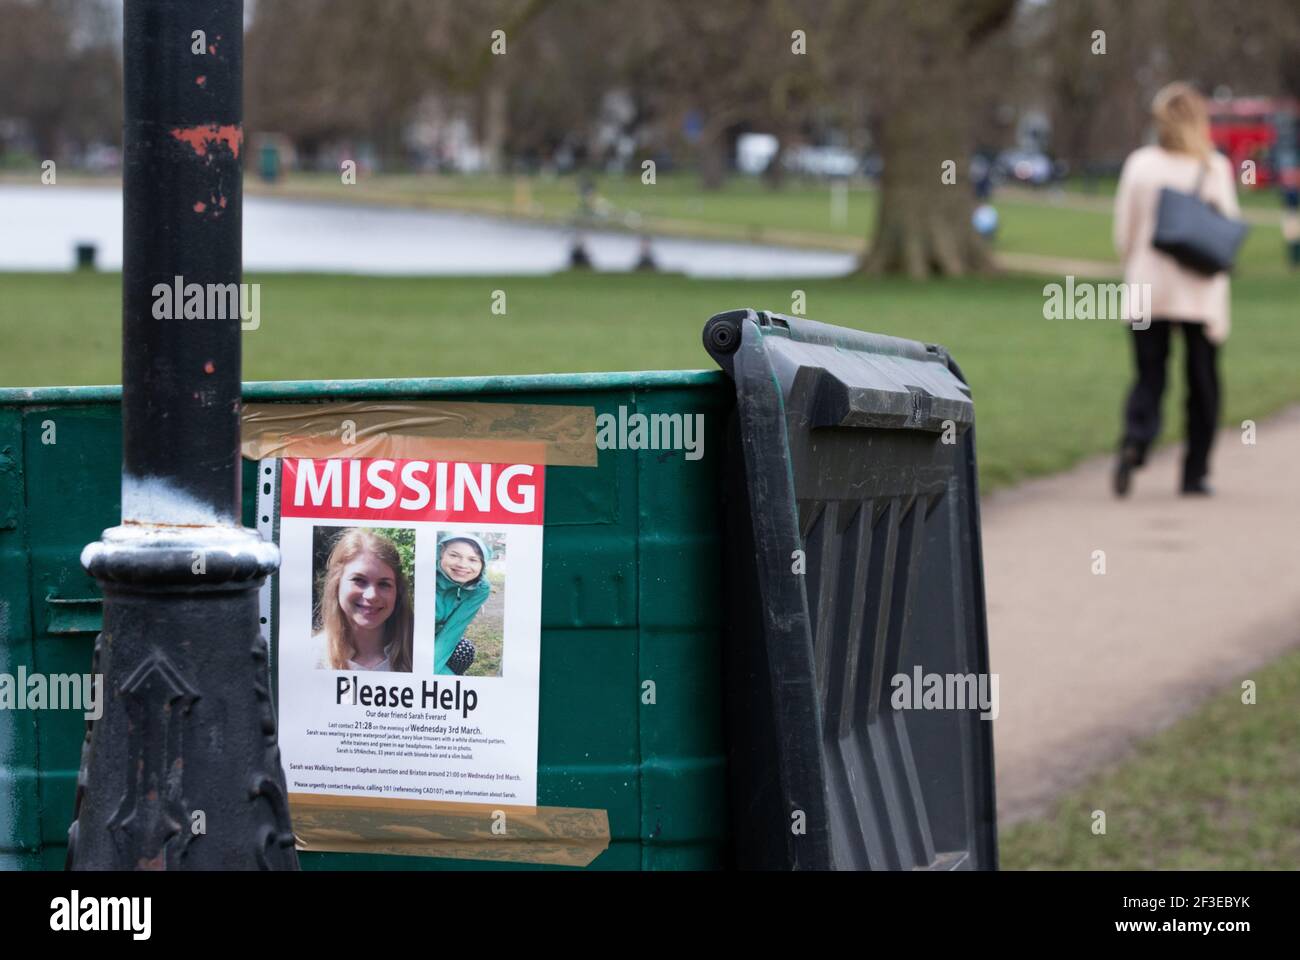 London, UK. 16th Mar, 2021. A 'Missing' sign for Sarah Everard taped to a bin. People continue to leave tributes and flowers for Sarah Everard at the bandstand on Clapham Common which has become a shrine. Sarah was last seen on March 3rd. Her body was found in a builders' bag in Woodland at Ashord. PC Wayne Couzens appeared at the Old Bailey via videolink from Belmarsh prison today. He will go on trial in October. Credit: Mark Thomas/Alamy Live News Stock Photo